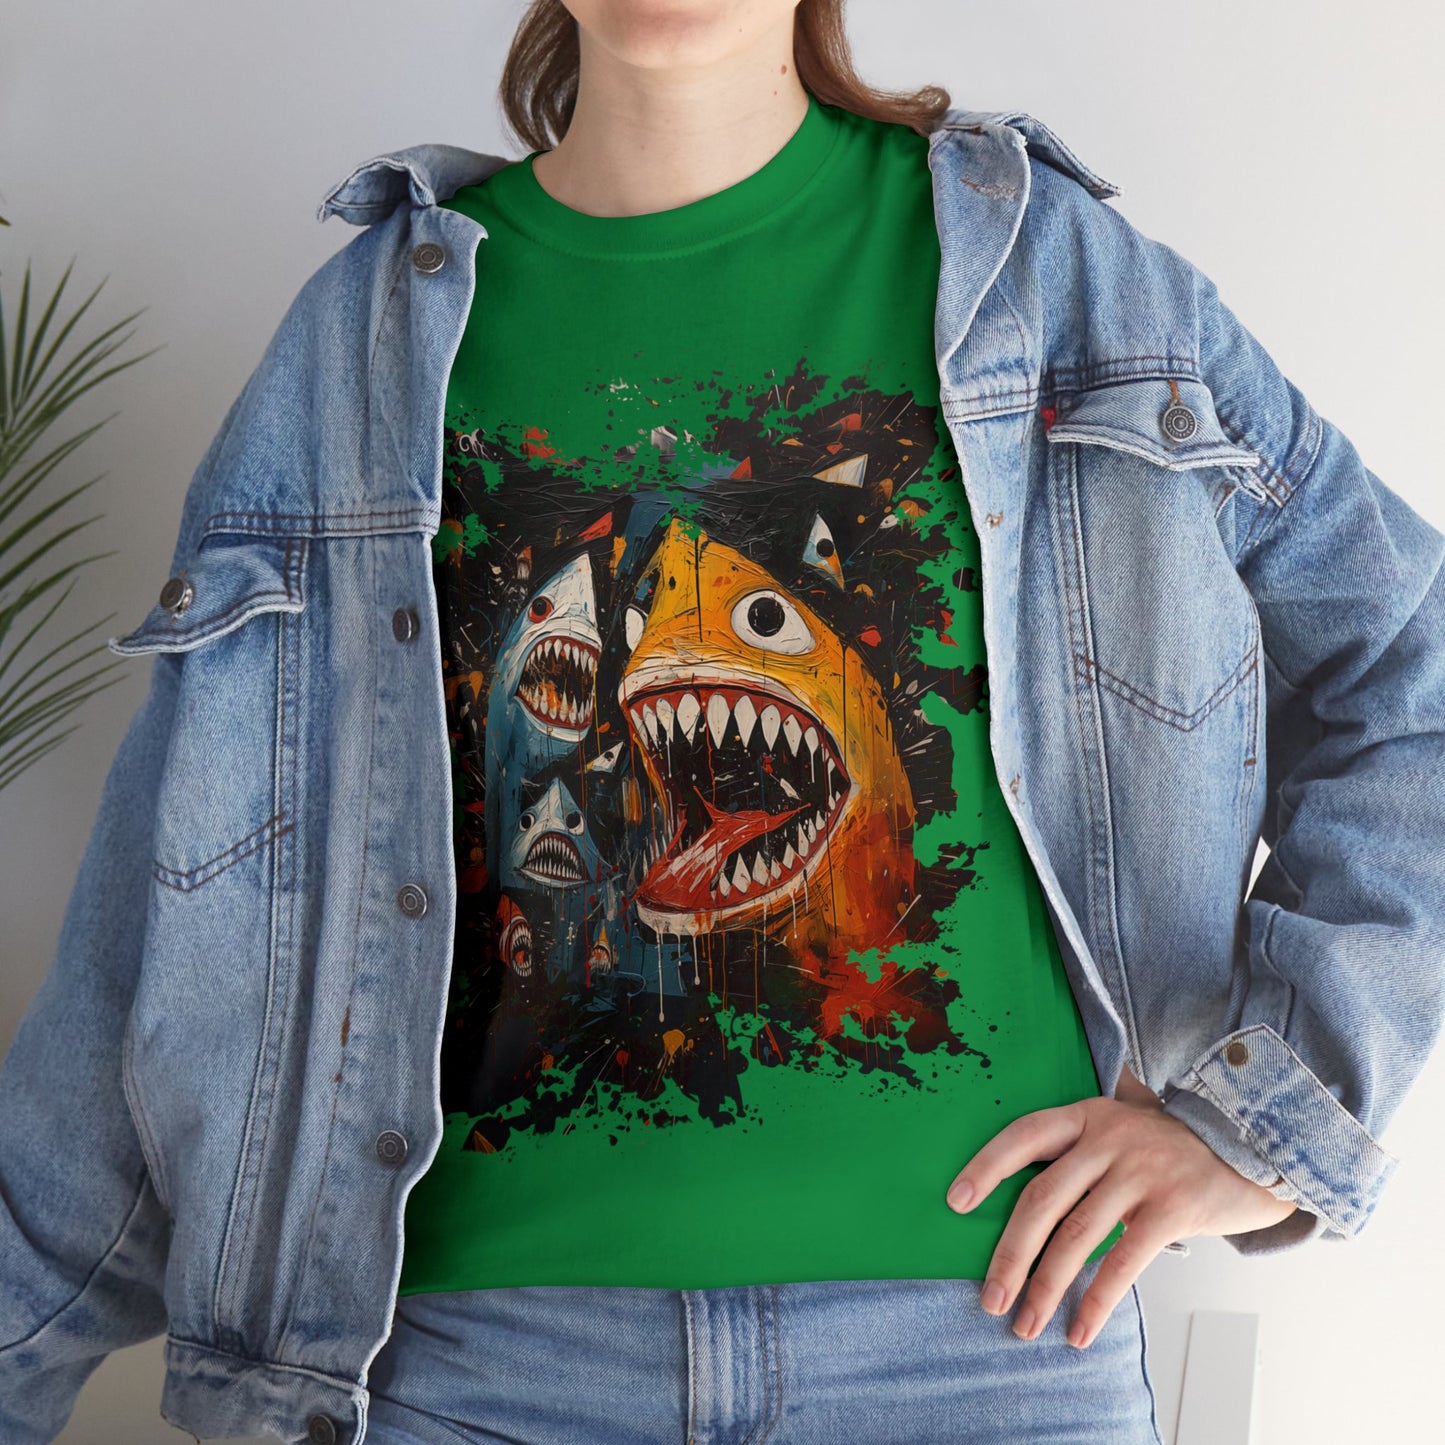 Neo Expressionist Sharks Unisex Heavy Cotton Tee (t-shirt)